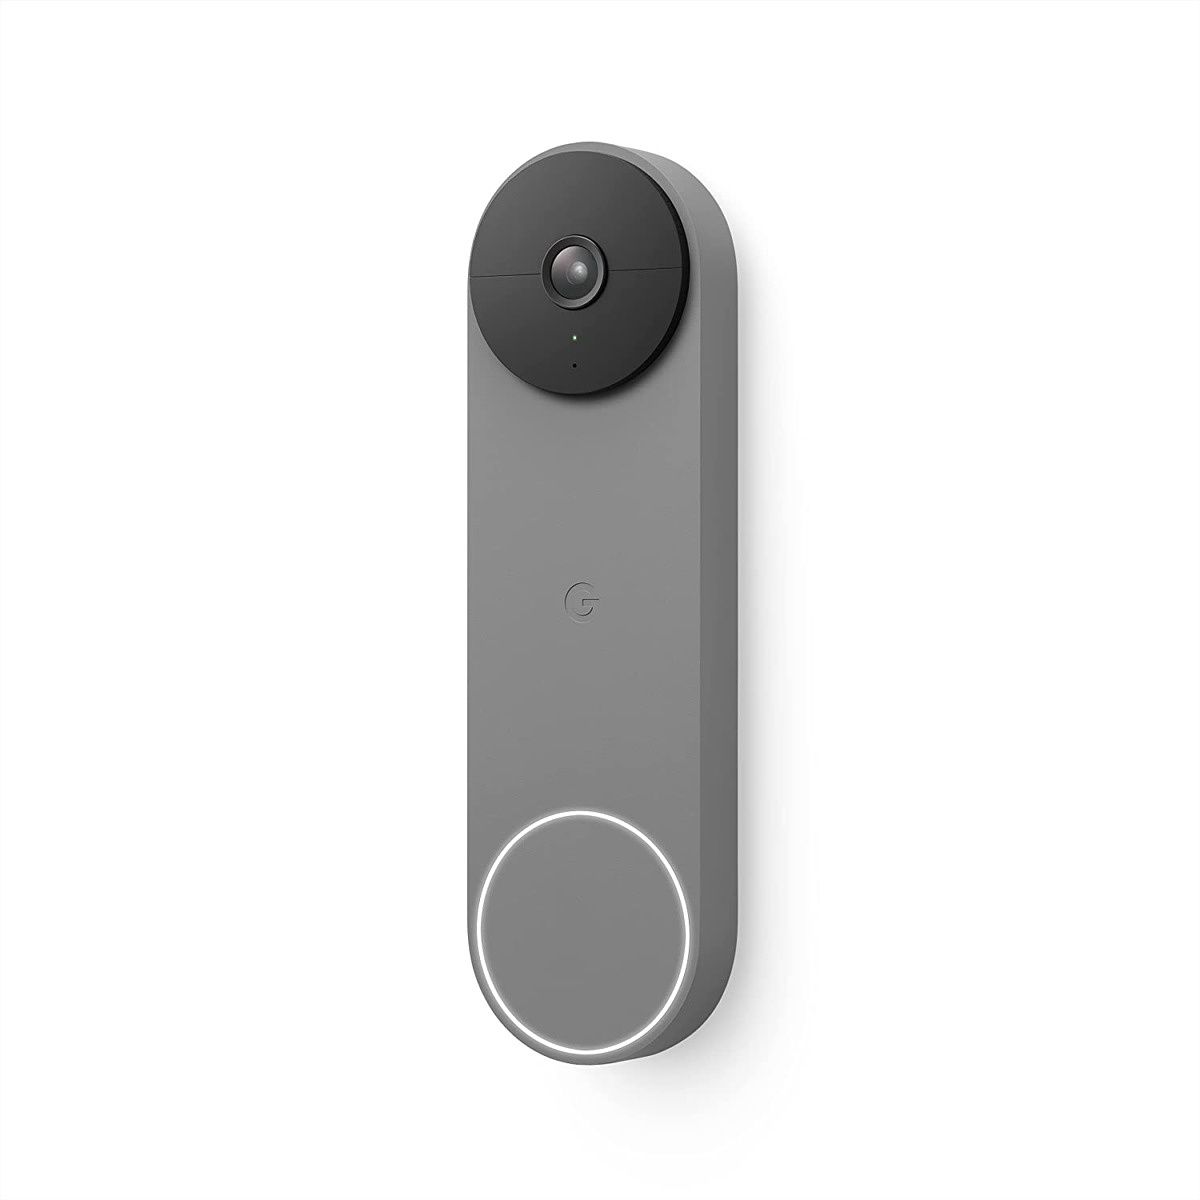 Google's doorbell now shares video with Amazon Alexa-powered smart displays, so your smart home can live in perfect harmony.